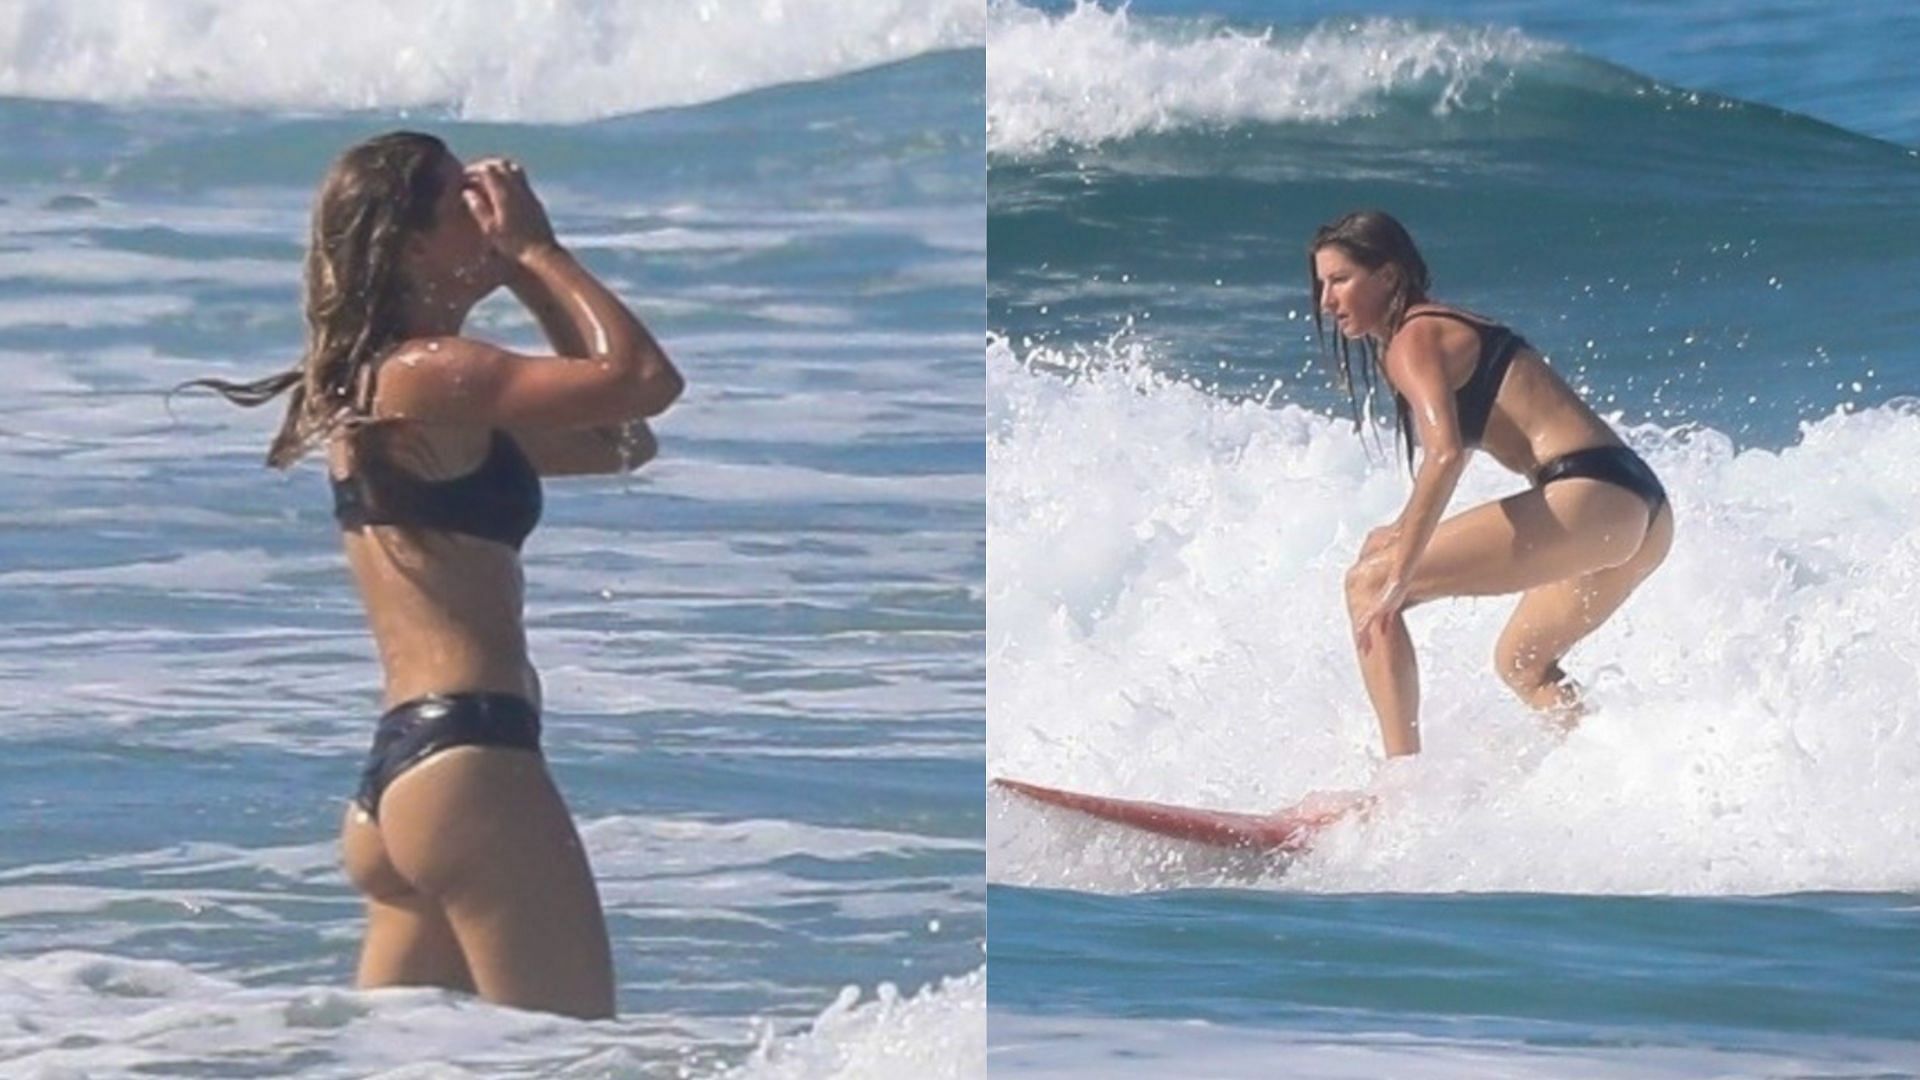 Gisele B&uuml;ndchen sets out to takeover the waves in Costa Rica (Image Credit: BackGrid).